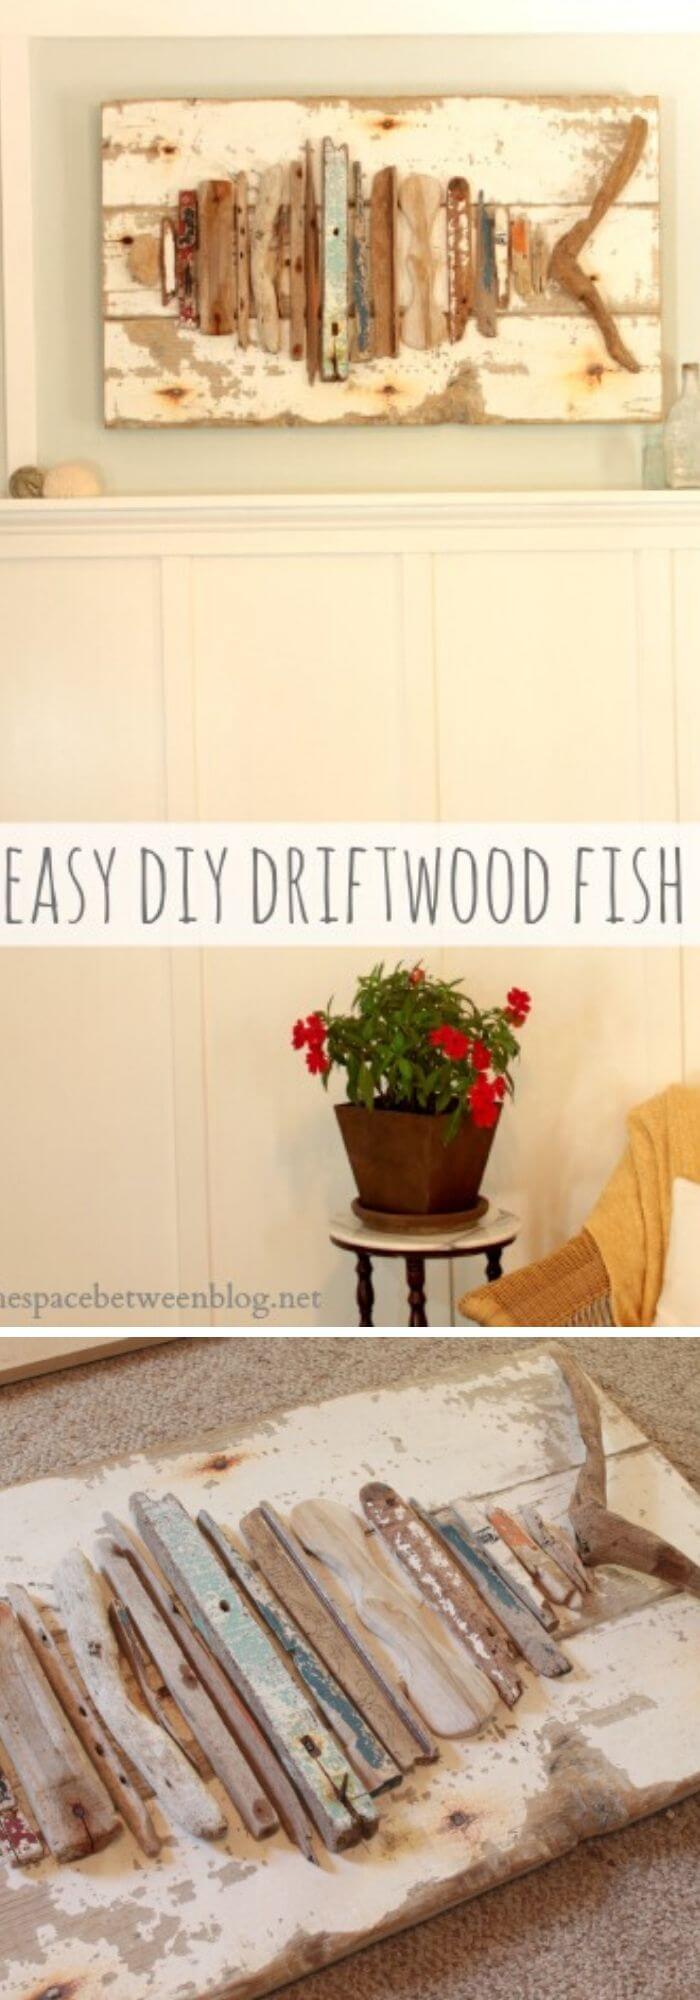 12 driftwood craft projects